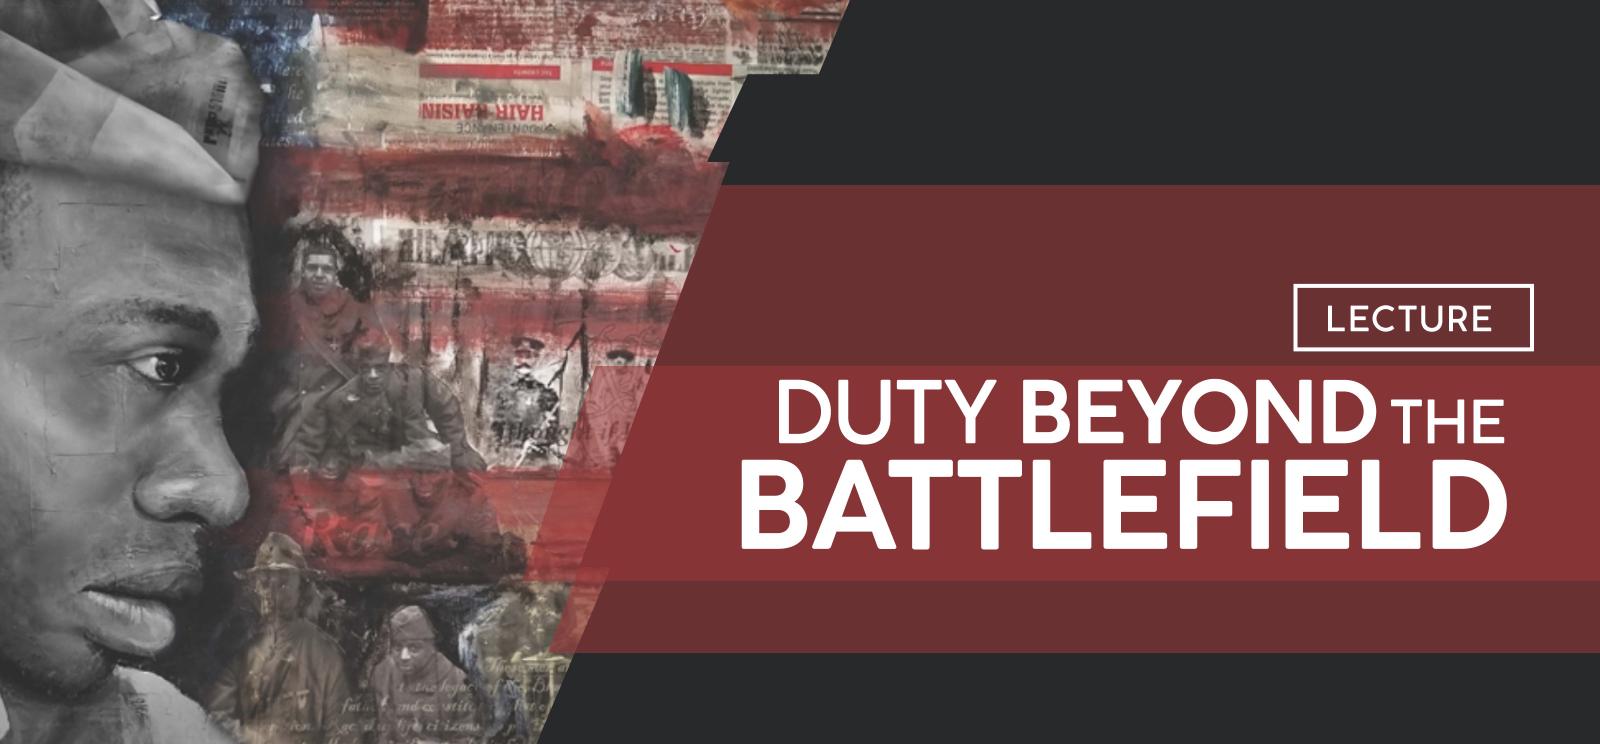 Image: Painting of the profile of a Black soldier. Text: Duty Beyond the Battlefield